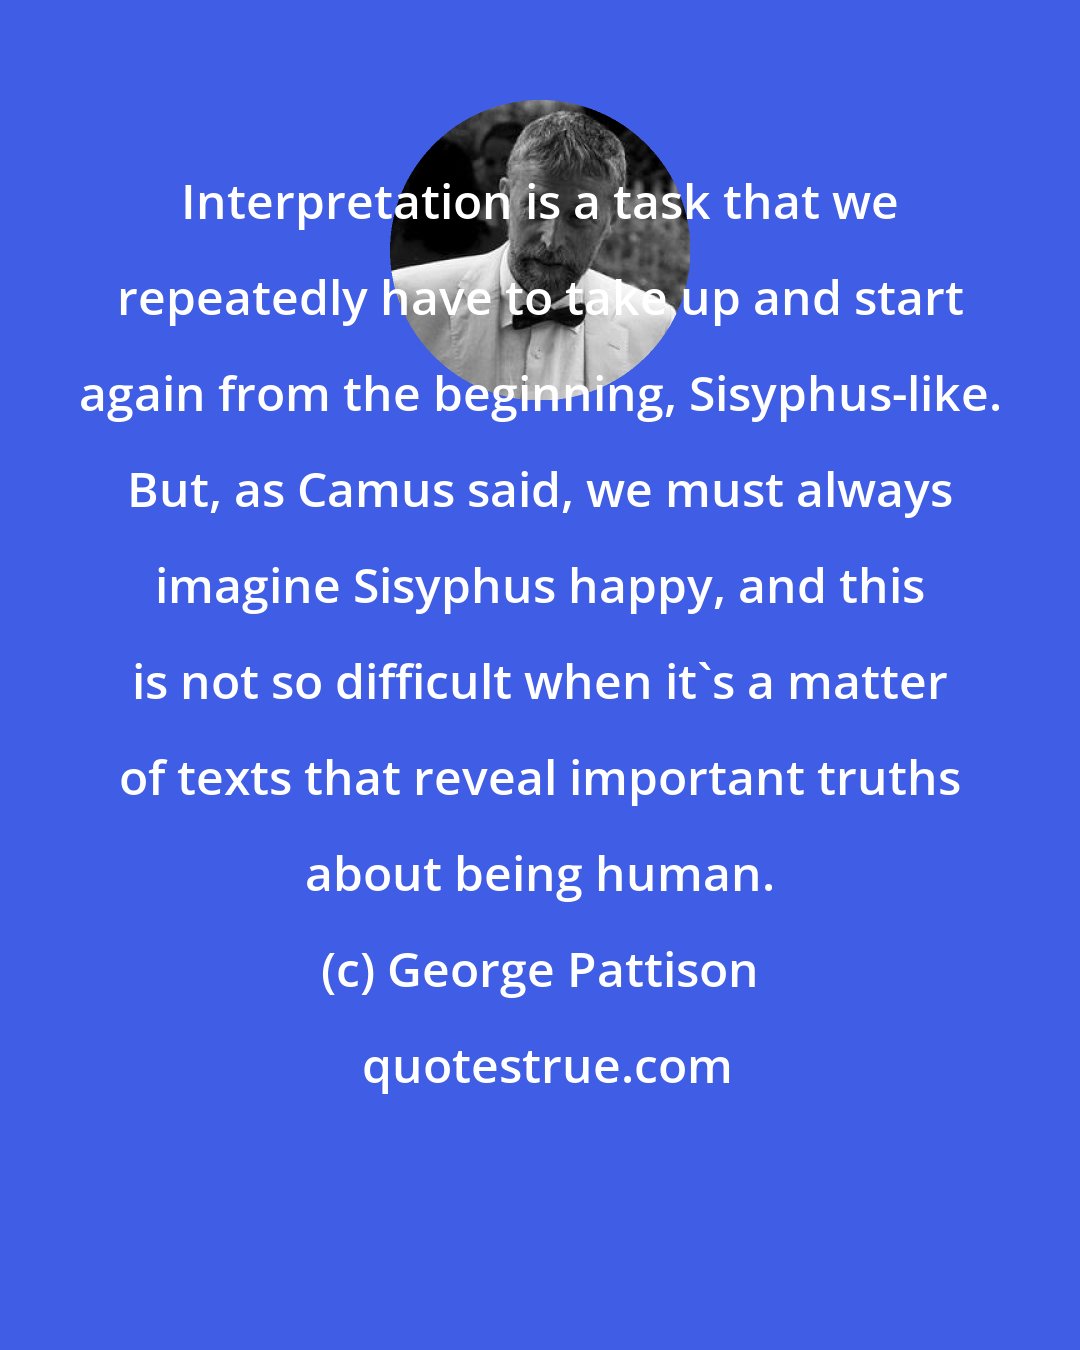 George Pattison: Interpretation is a task that we repeatedly have to take up and start again from the beginning, Sisyphus-like. But, as Camus said, we must always imagine Sisyphus happy, and this is not so difficult when it's a matter of texts that reveal important truths about being human.